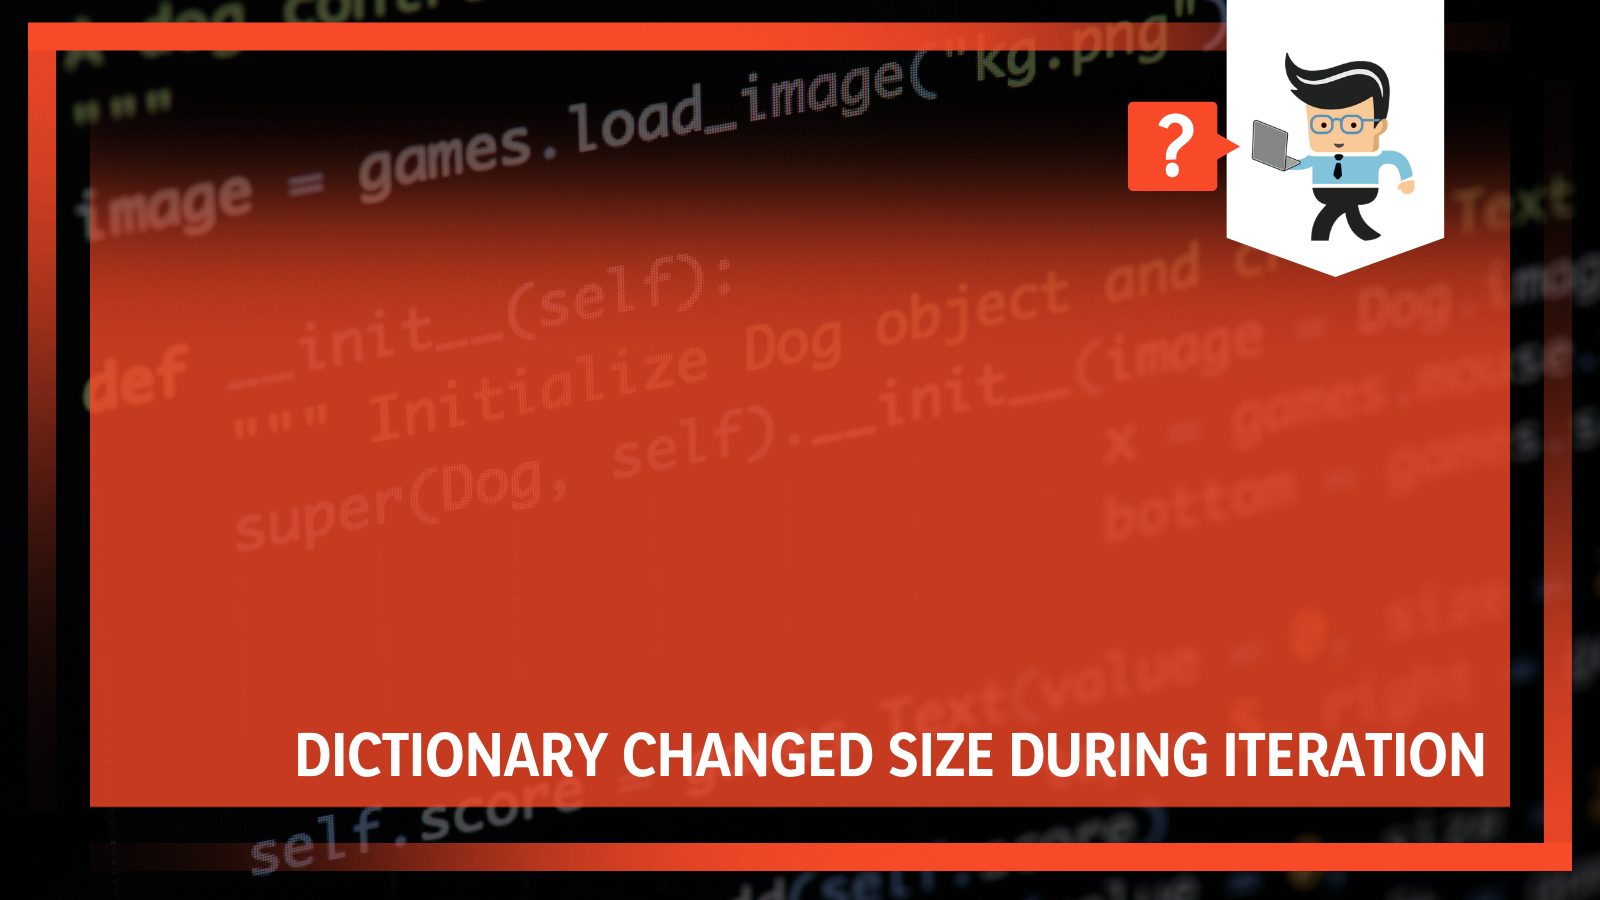 How to fix the dictionary changed size during iteration error